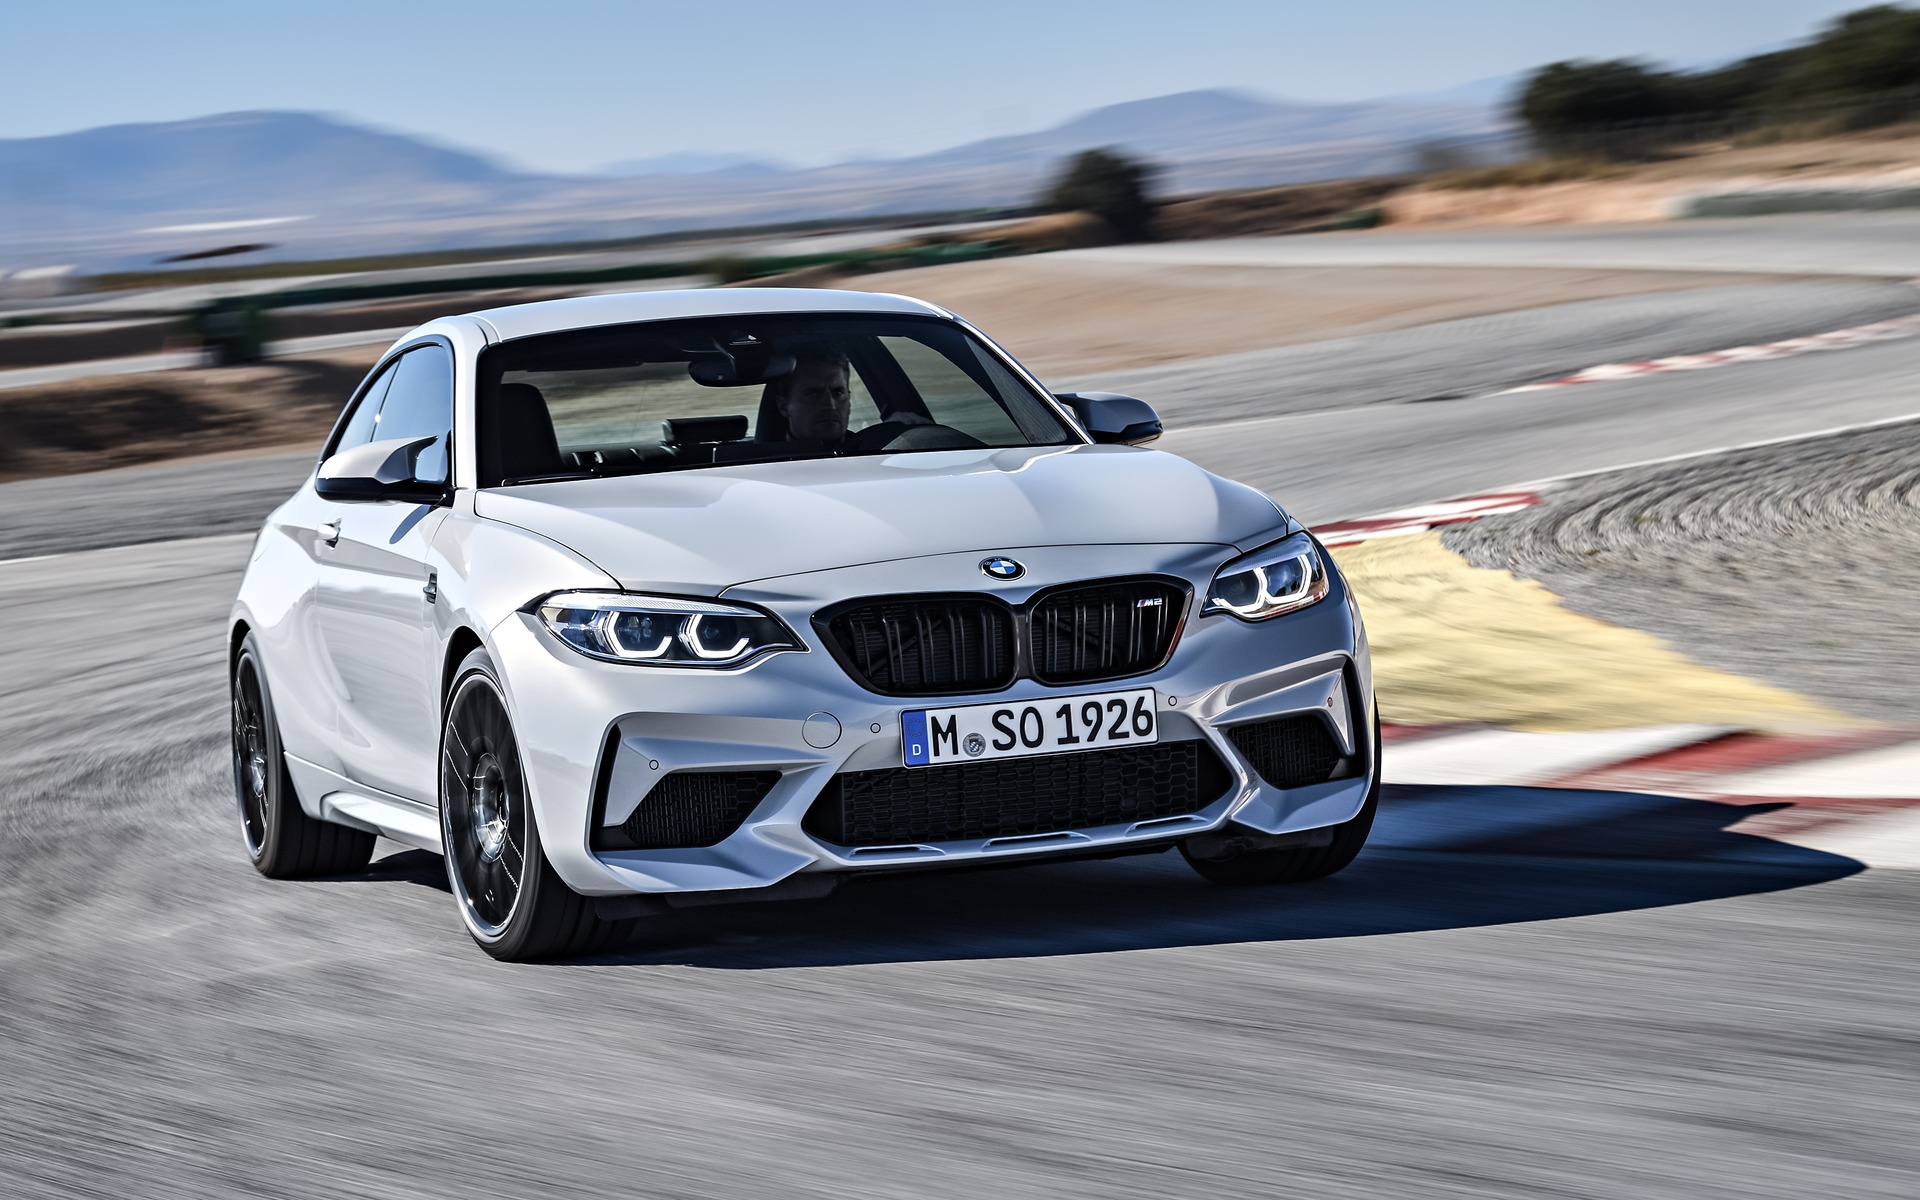 2019 Bmw 2 Series M240i Xdrive Coupe Specifications The